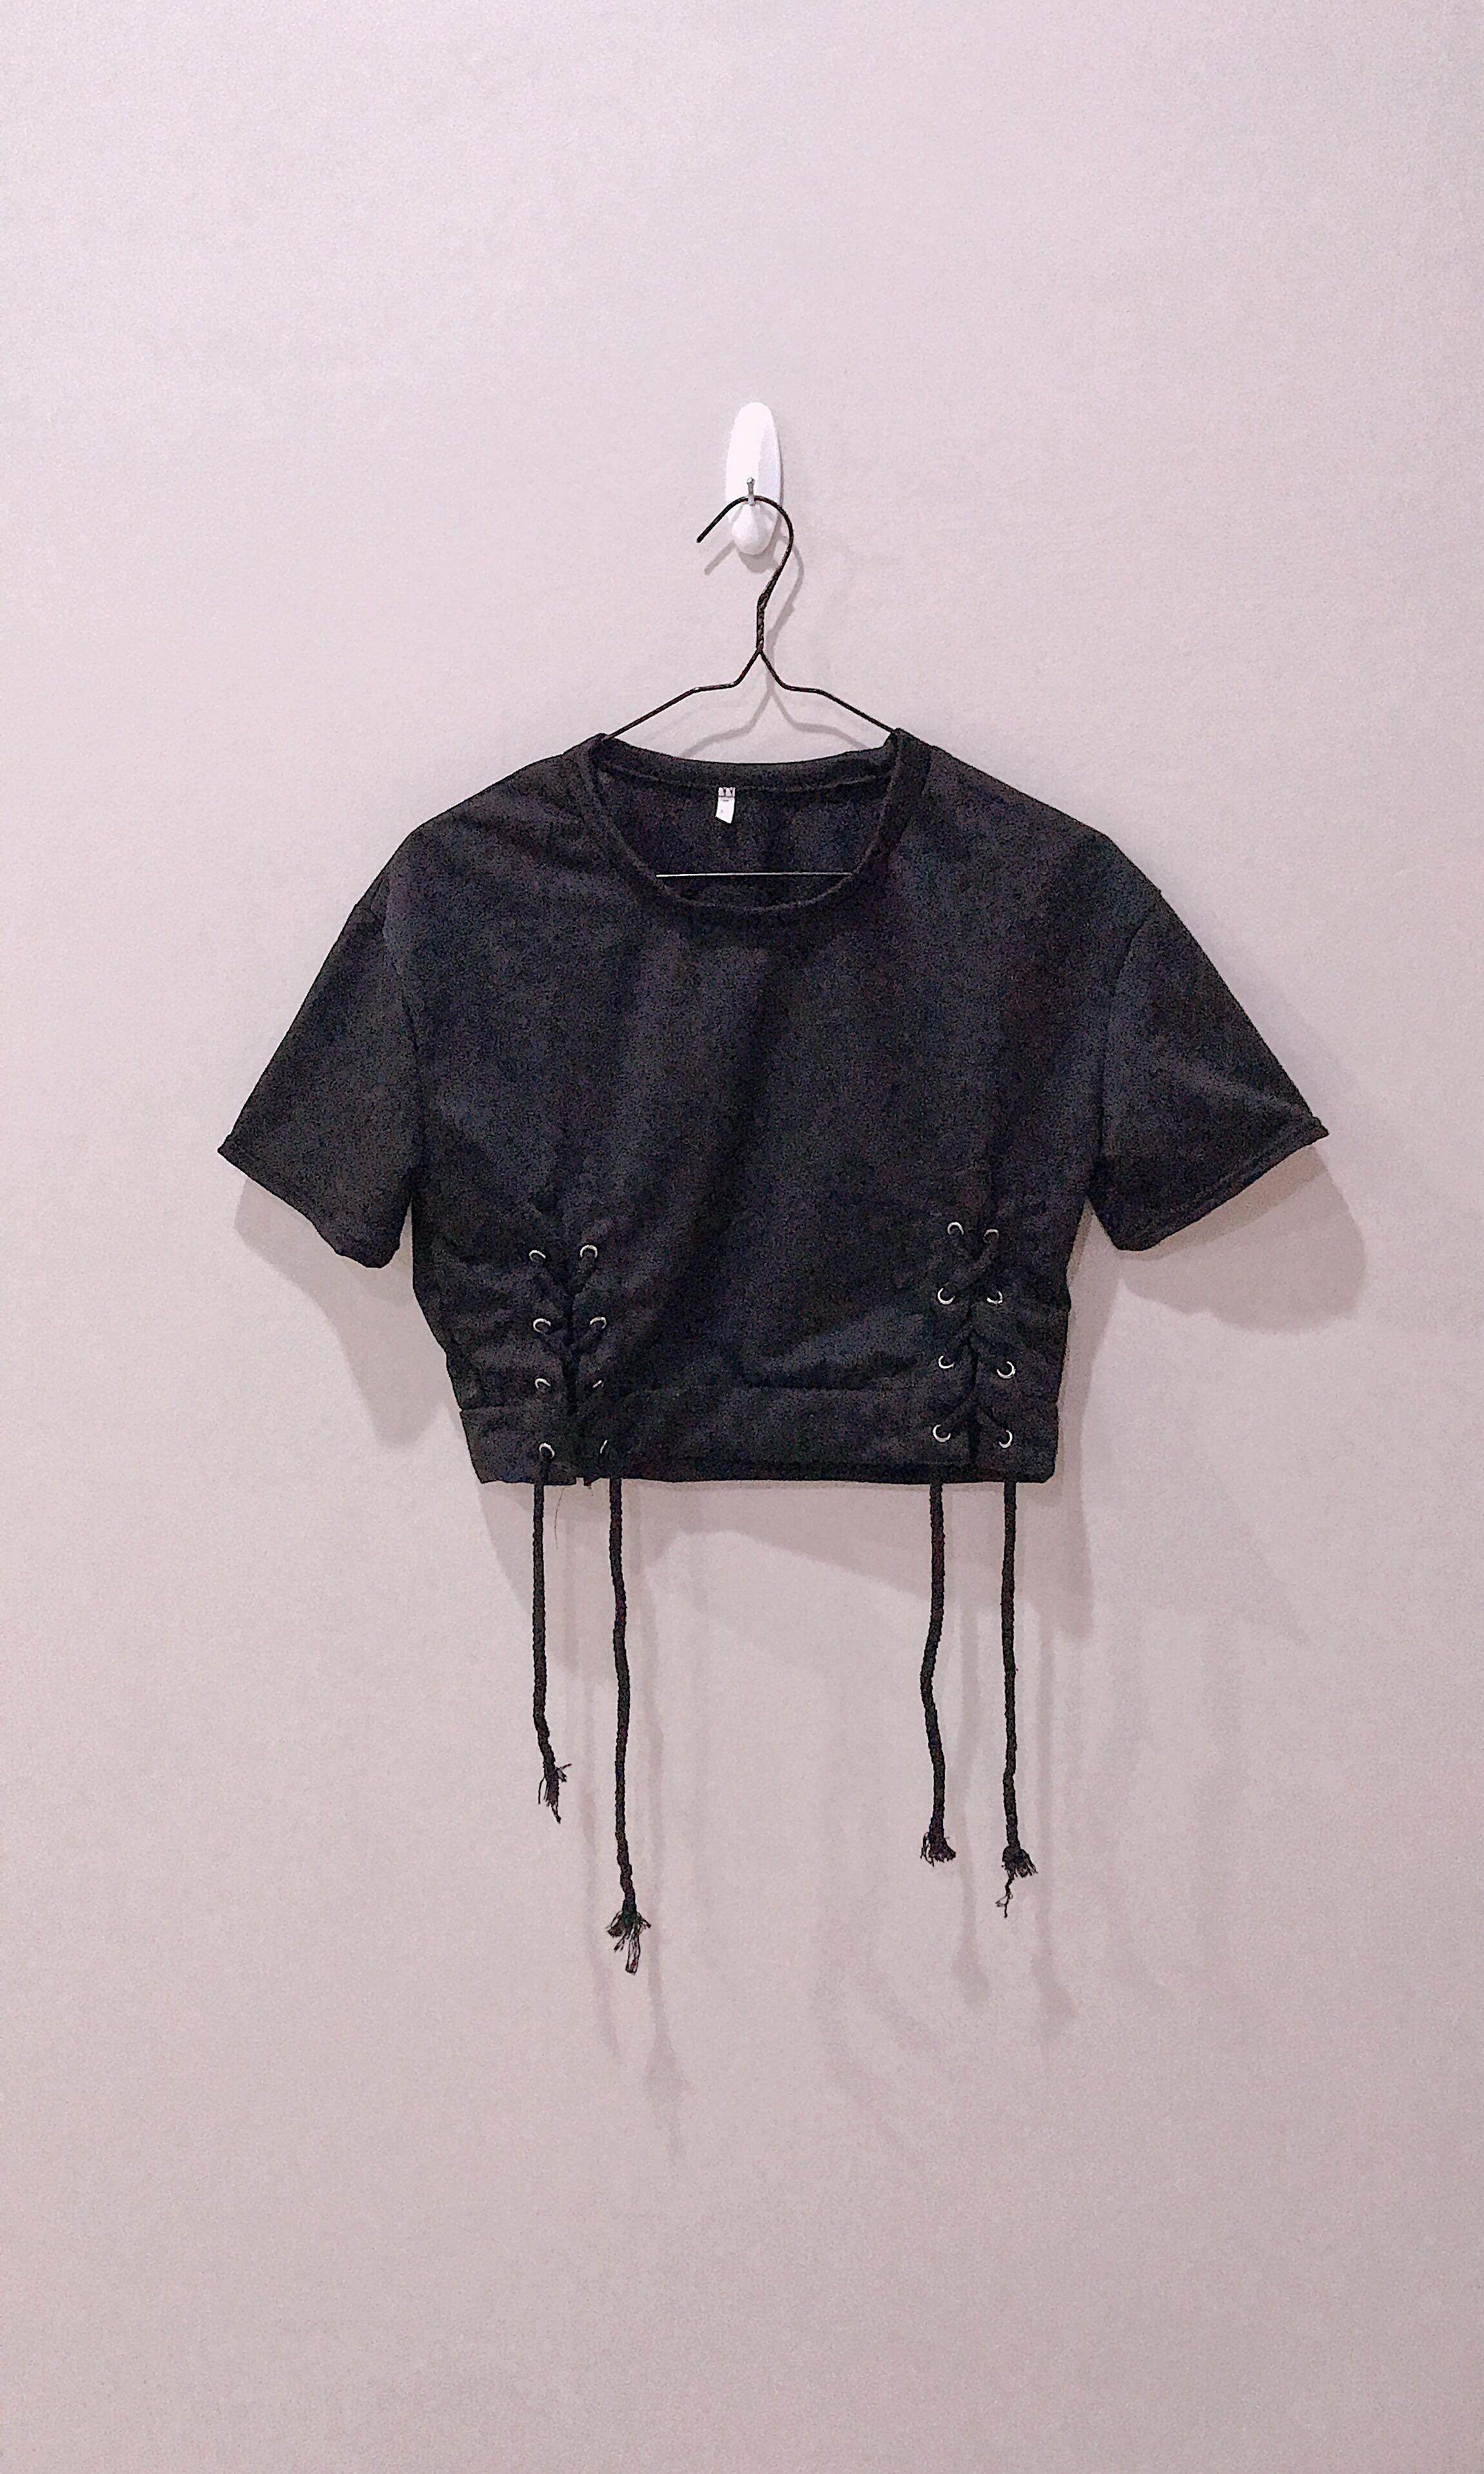 Laced-Front Crop Top